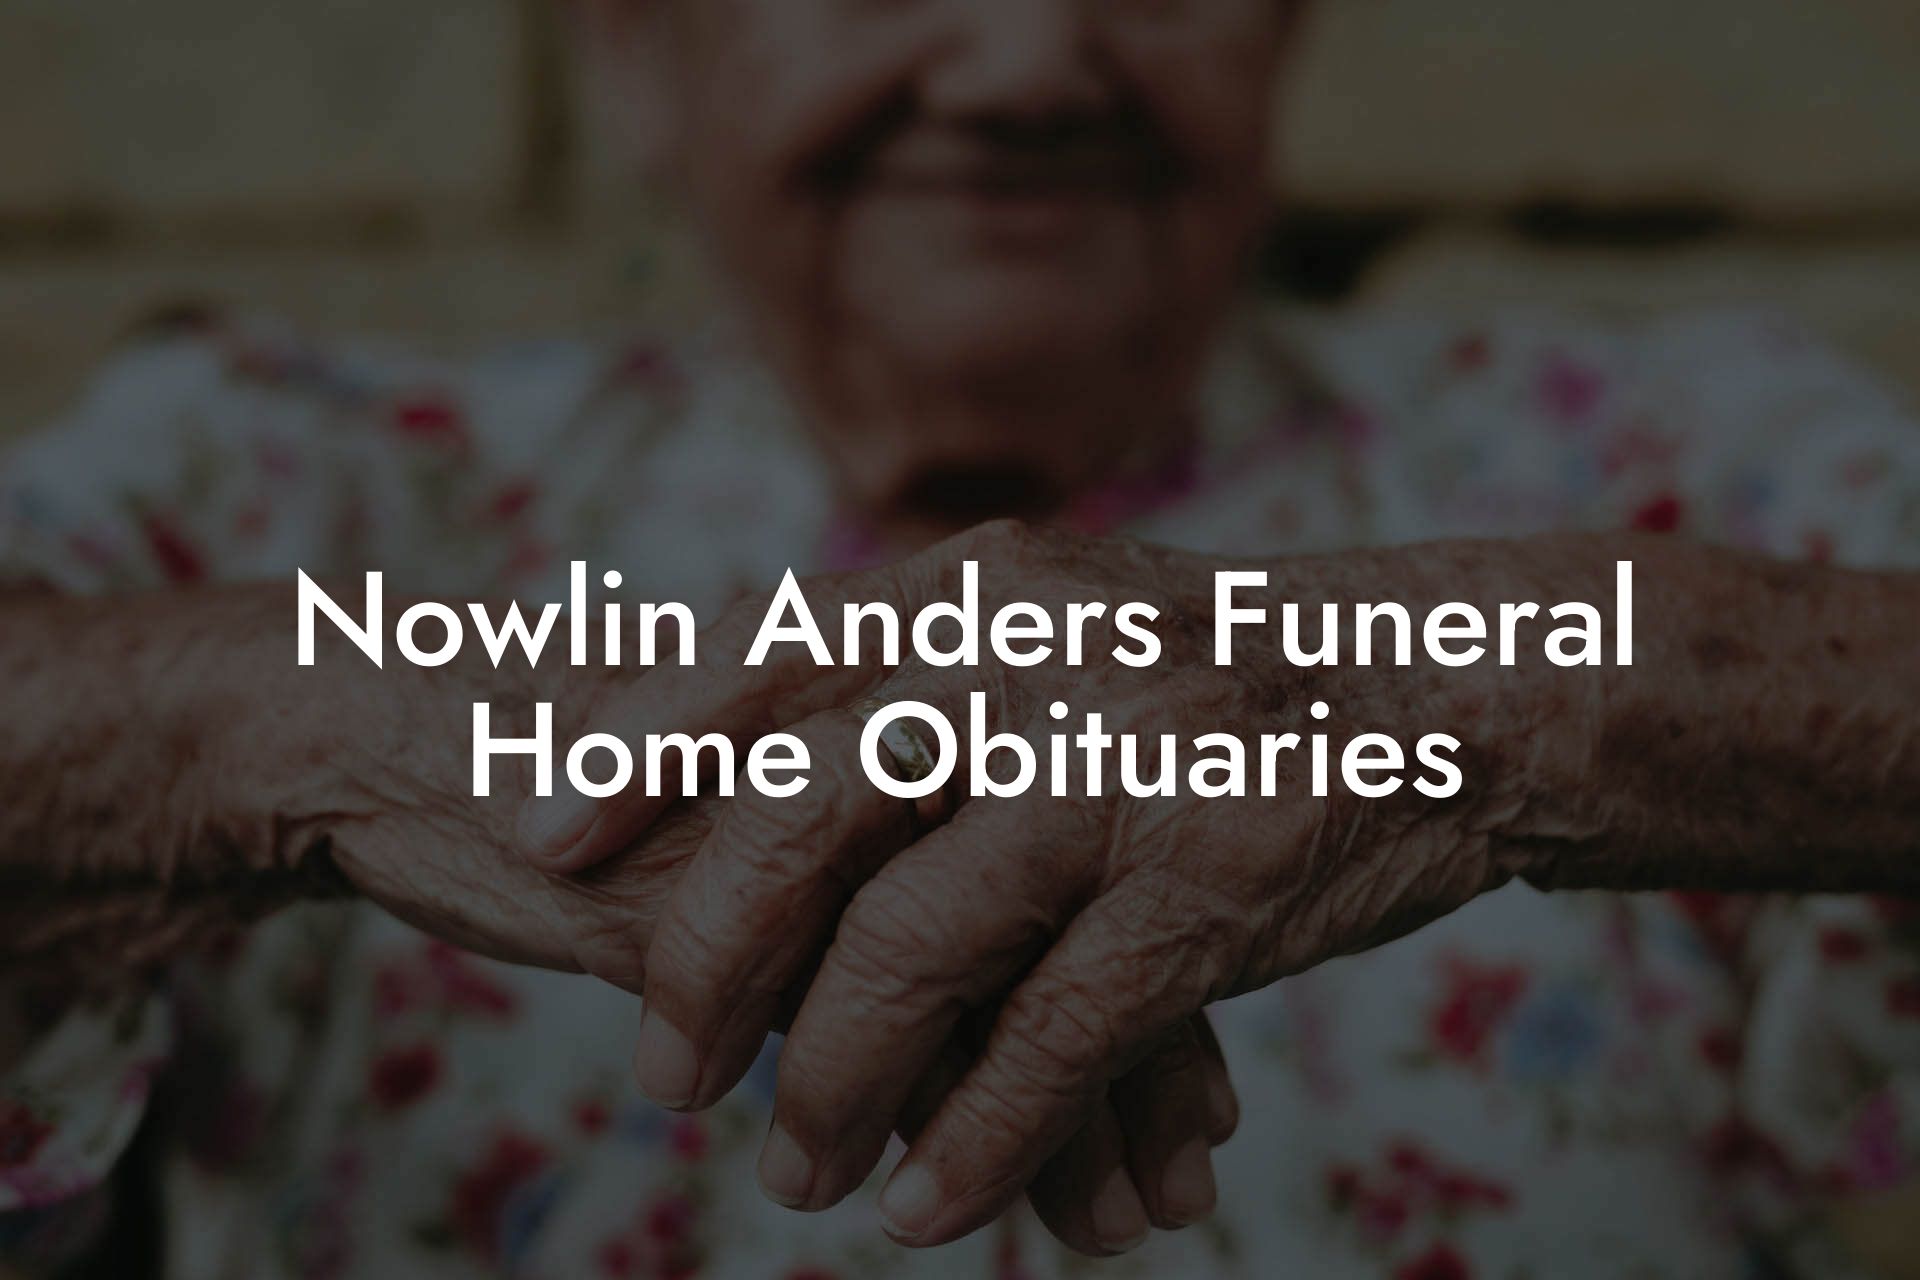 Nowlin Anders Funeral Home Obituaries